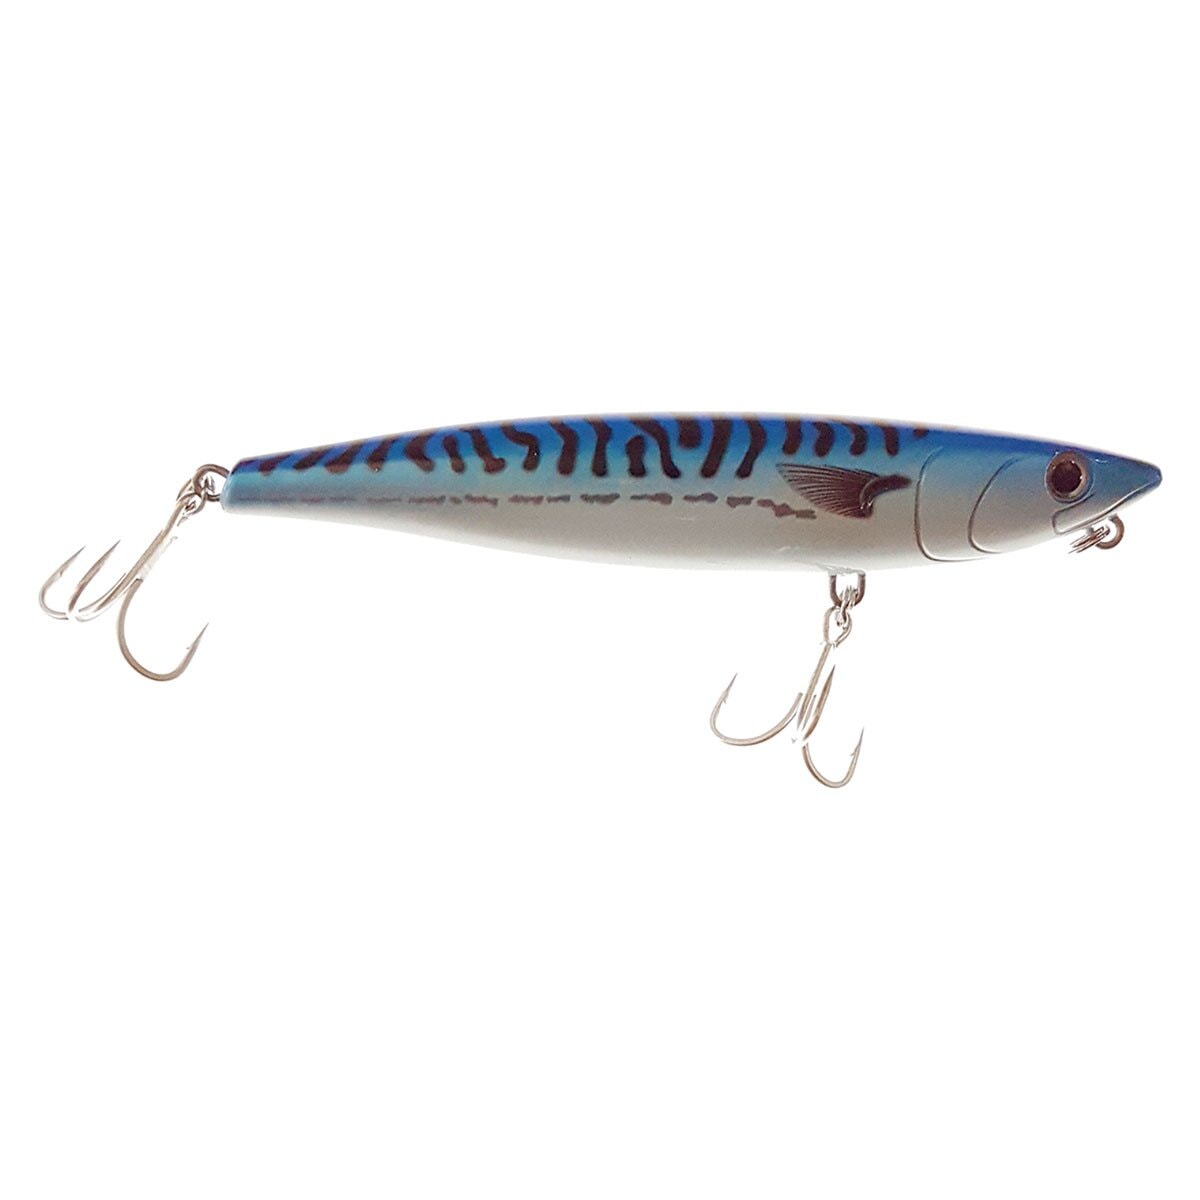  Lindy River Rocker - Redtail - #3 : Fishing Soft Plastic Lures  : Sports & Outdoors